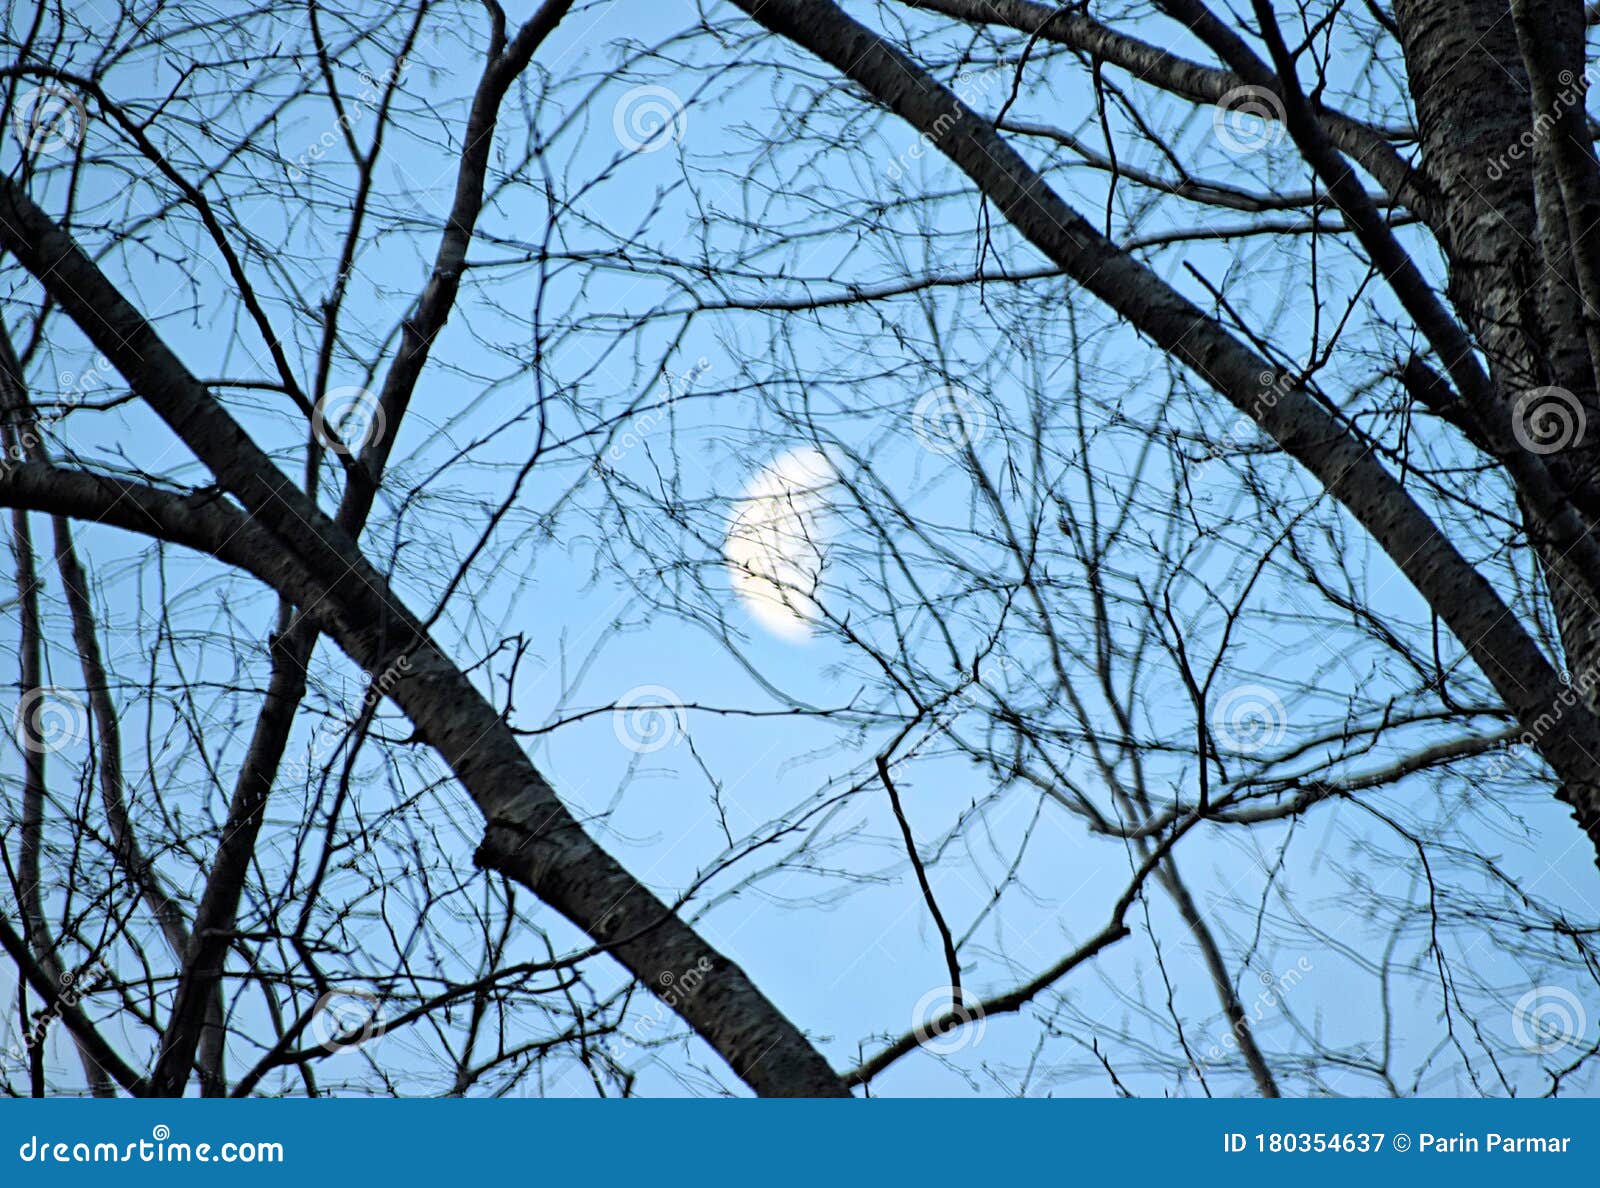 Abstract - Network of Branches of Trees with Blue Sky and White